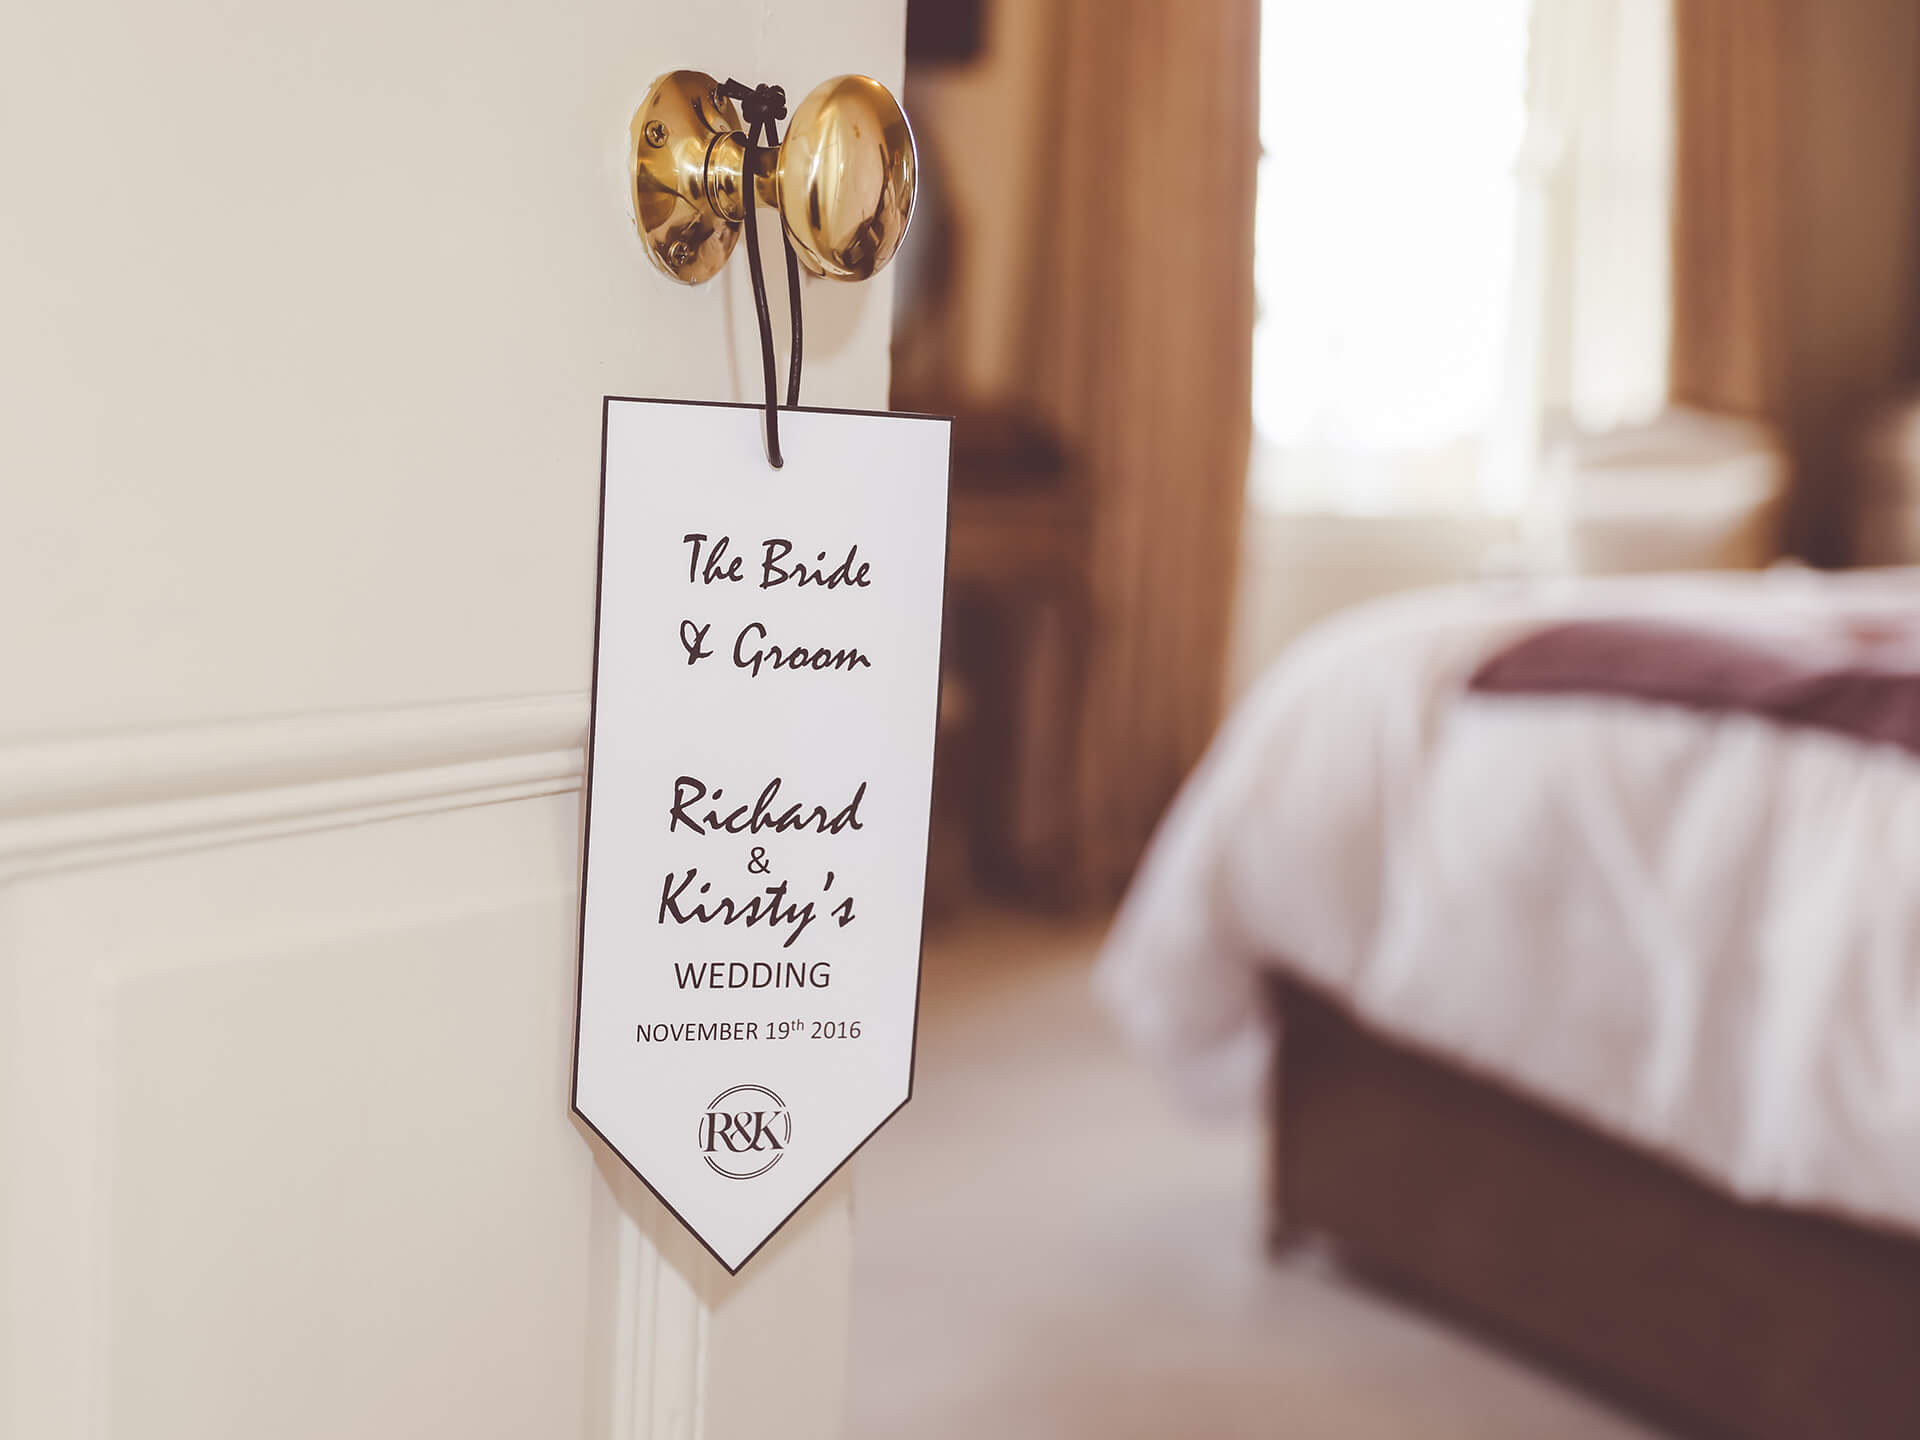 Kirsty and Richard planned everything down to the finest details. Image by <a href="http://www.creamphotography.co.uk/" target="_blank">Cream Photography</a>.   